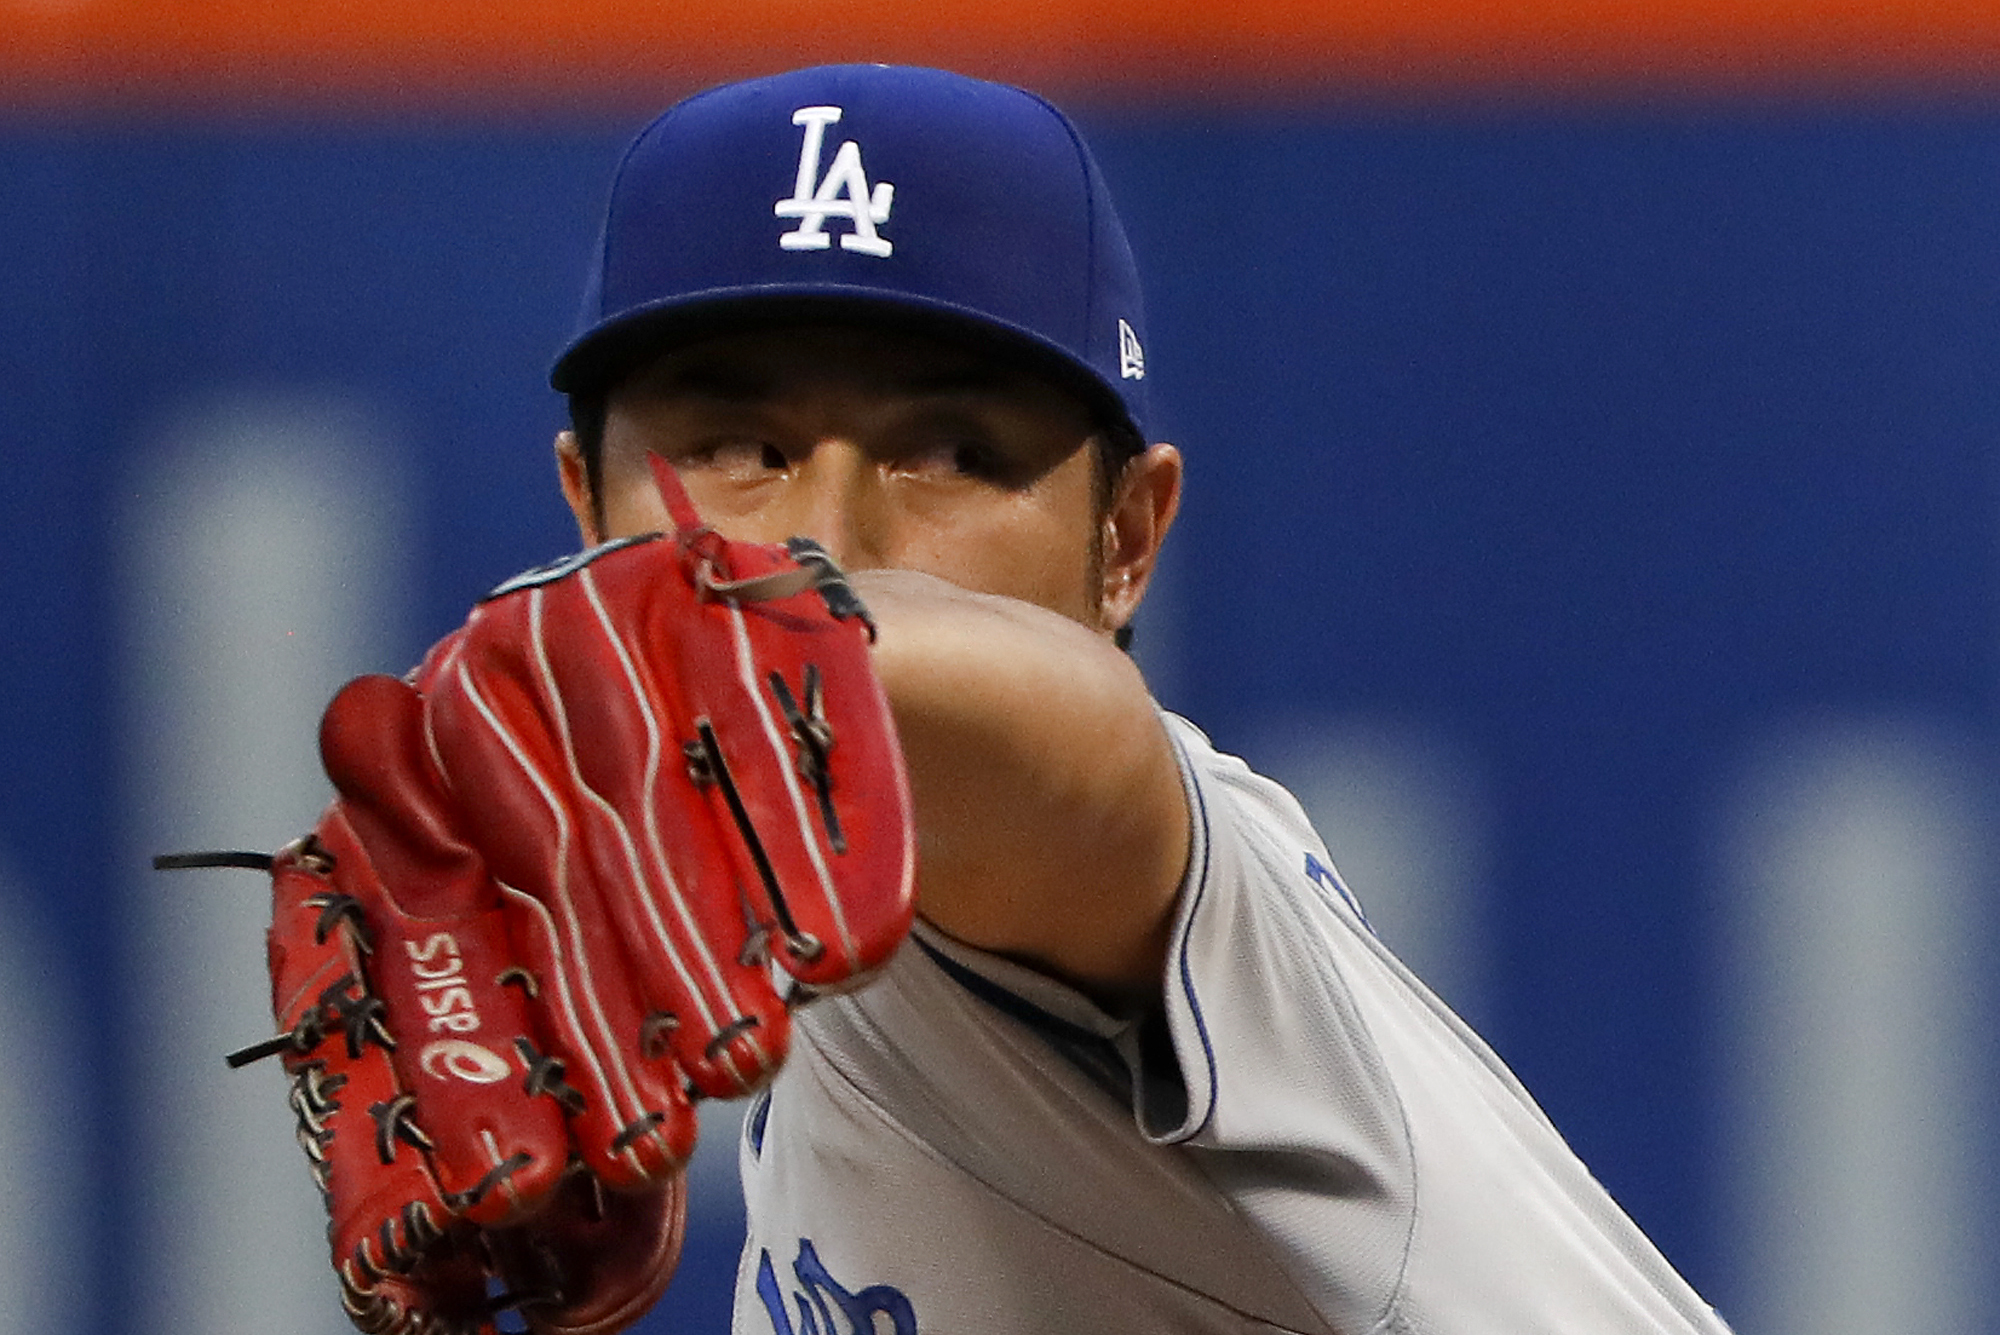 Yu Darvish to make Dodgers debut Friday in New York vs. Mets